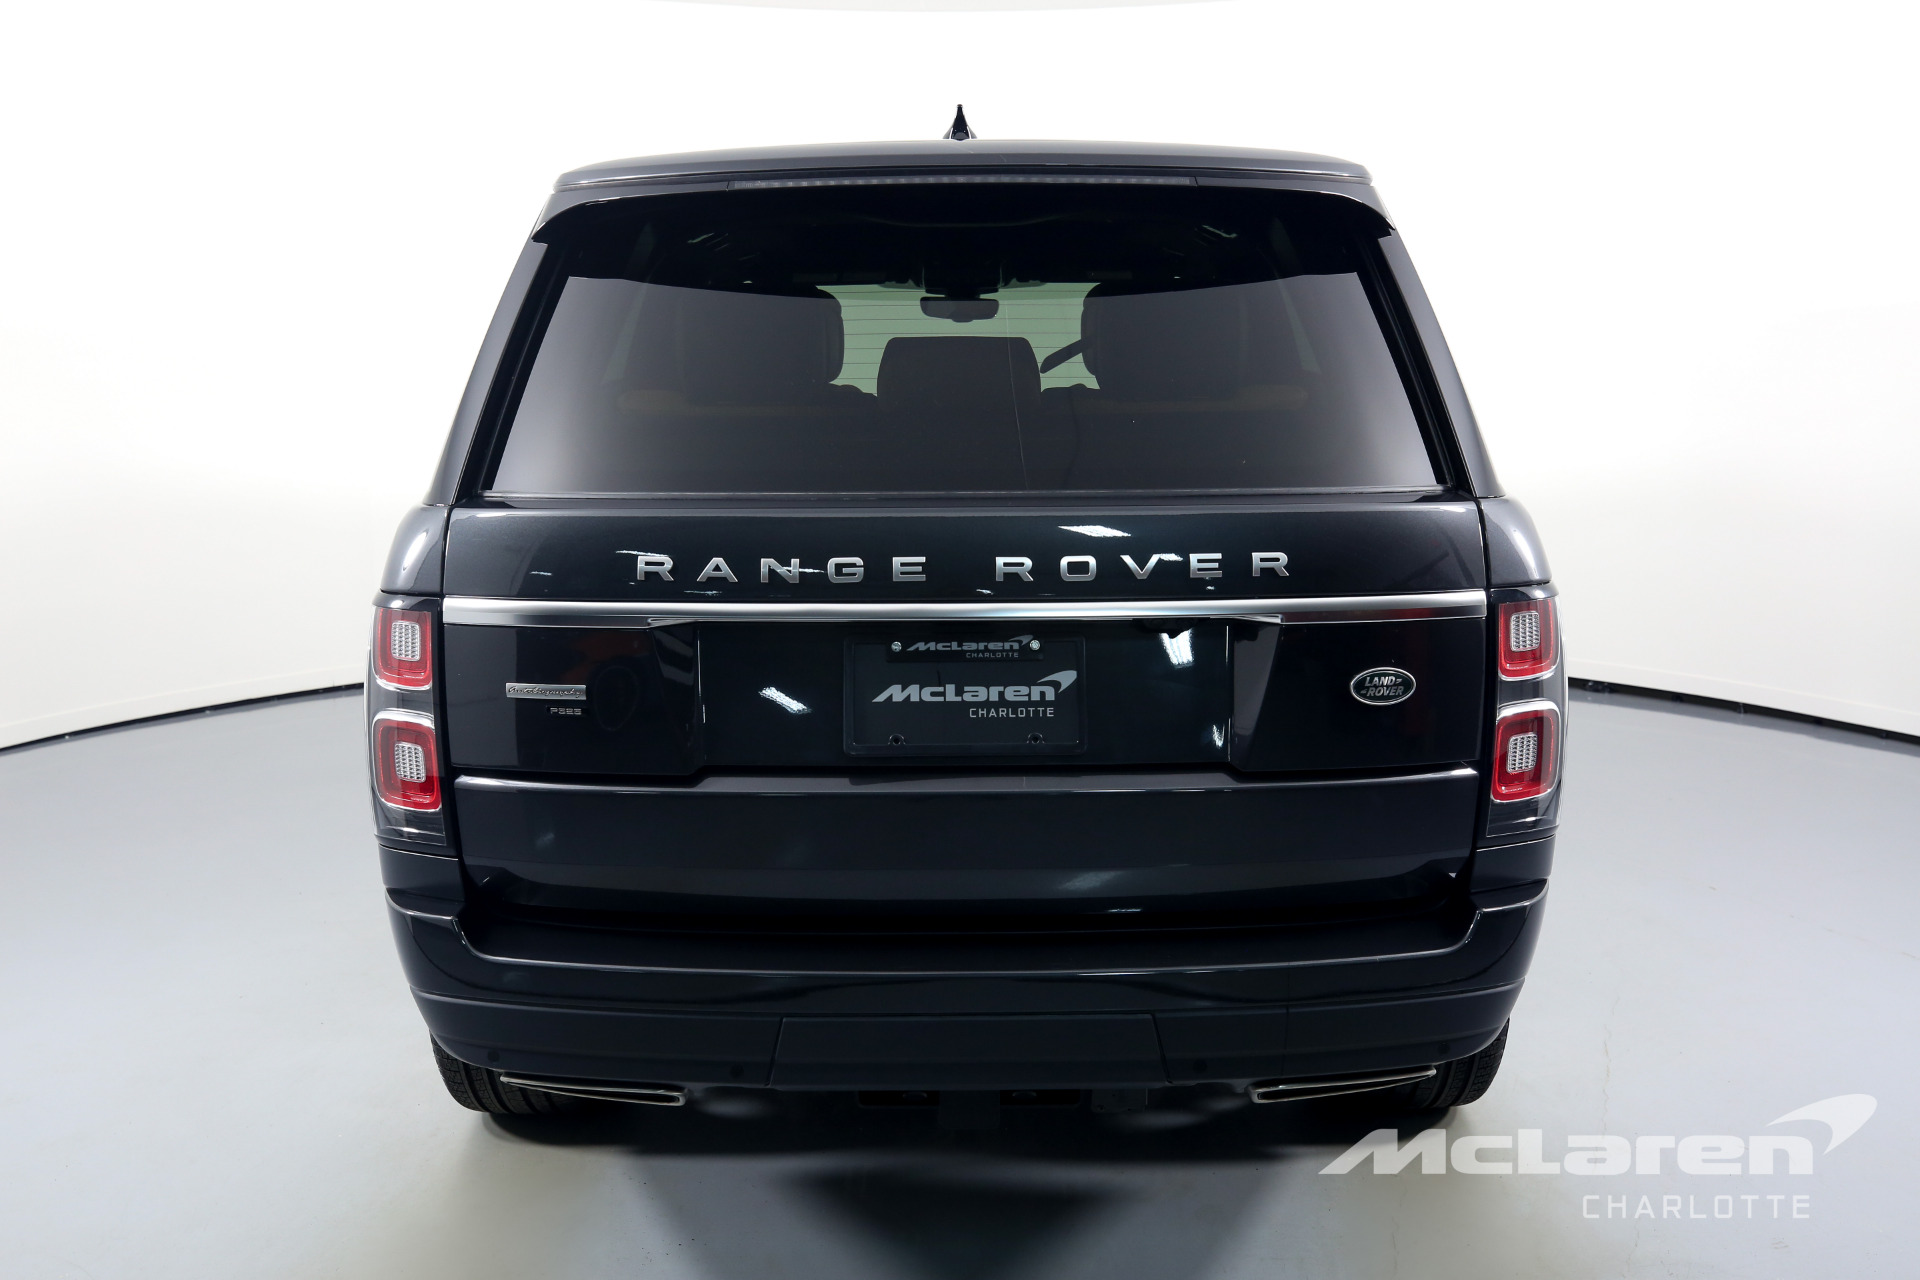 2020 Land Rover Range Rover Autobiography Used  - Compare Vehicles With The Land Rover Comparison Tool.